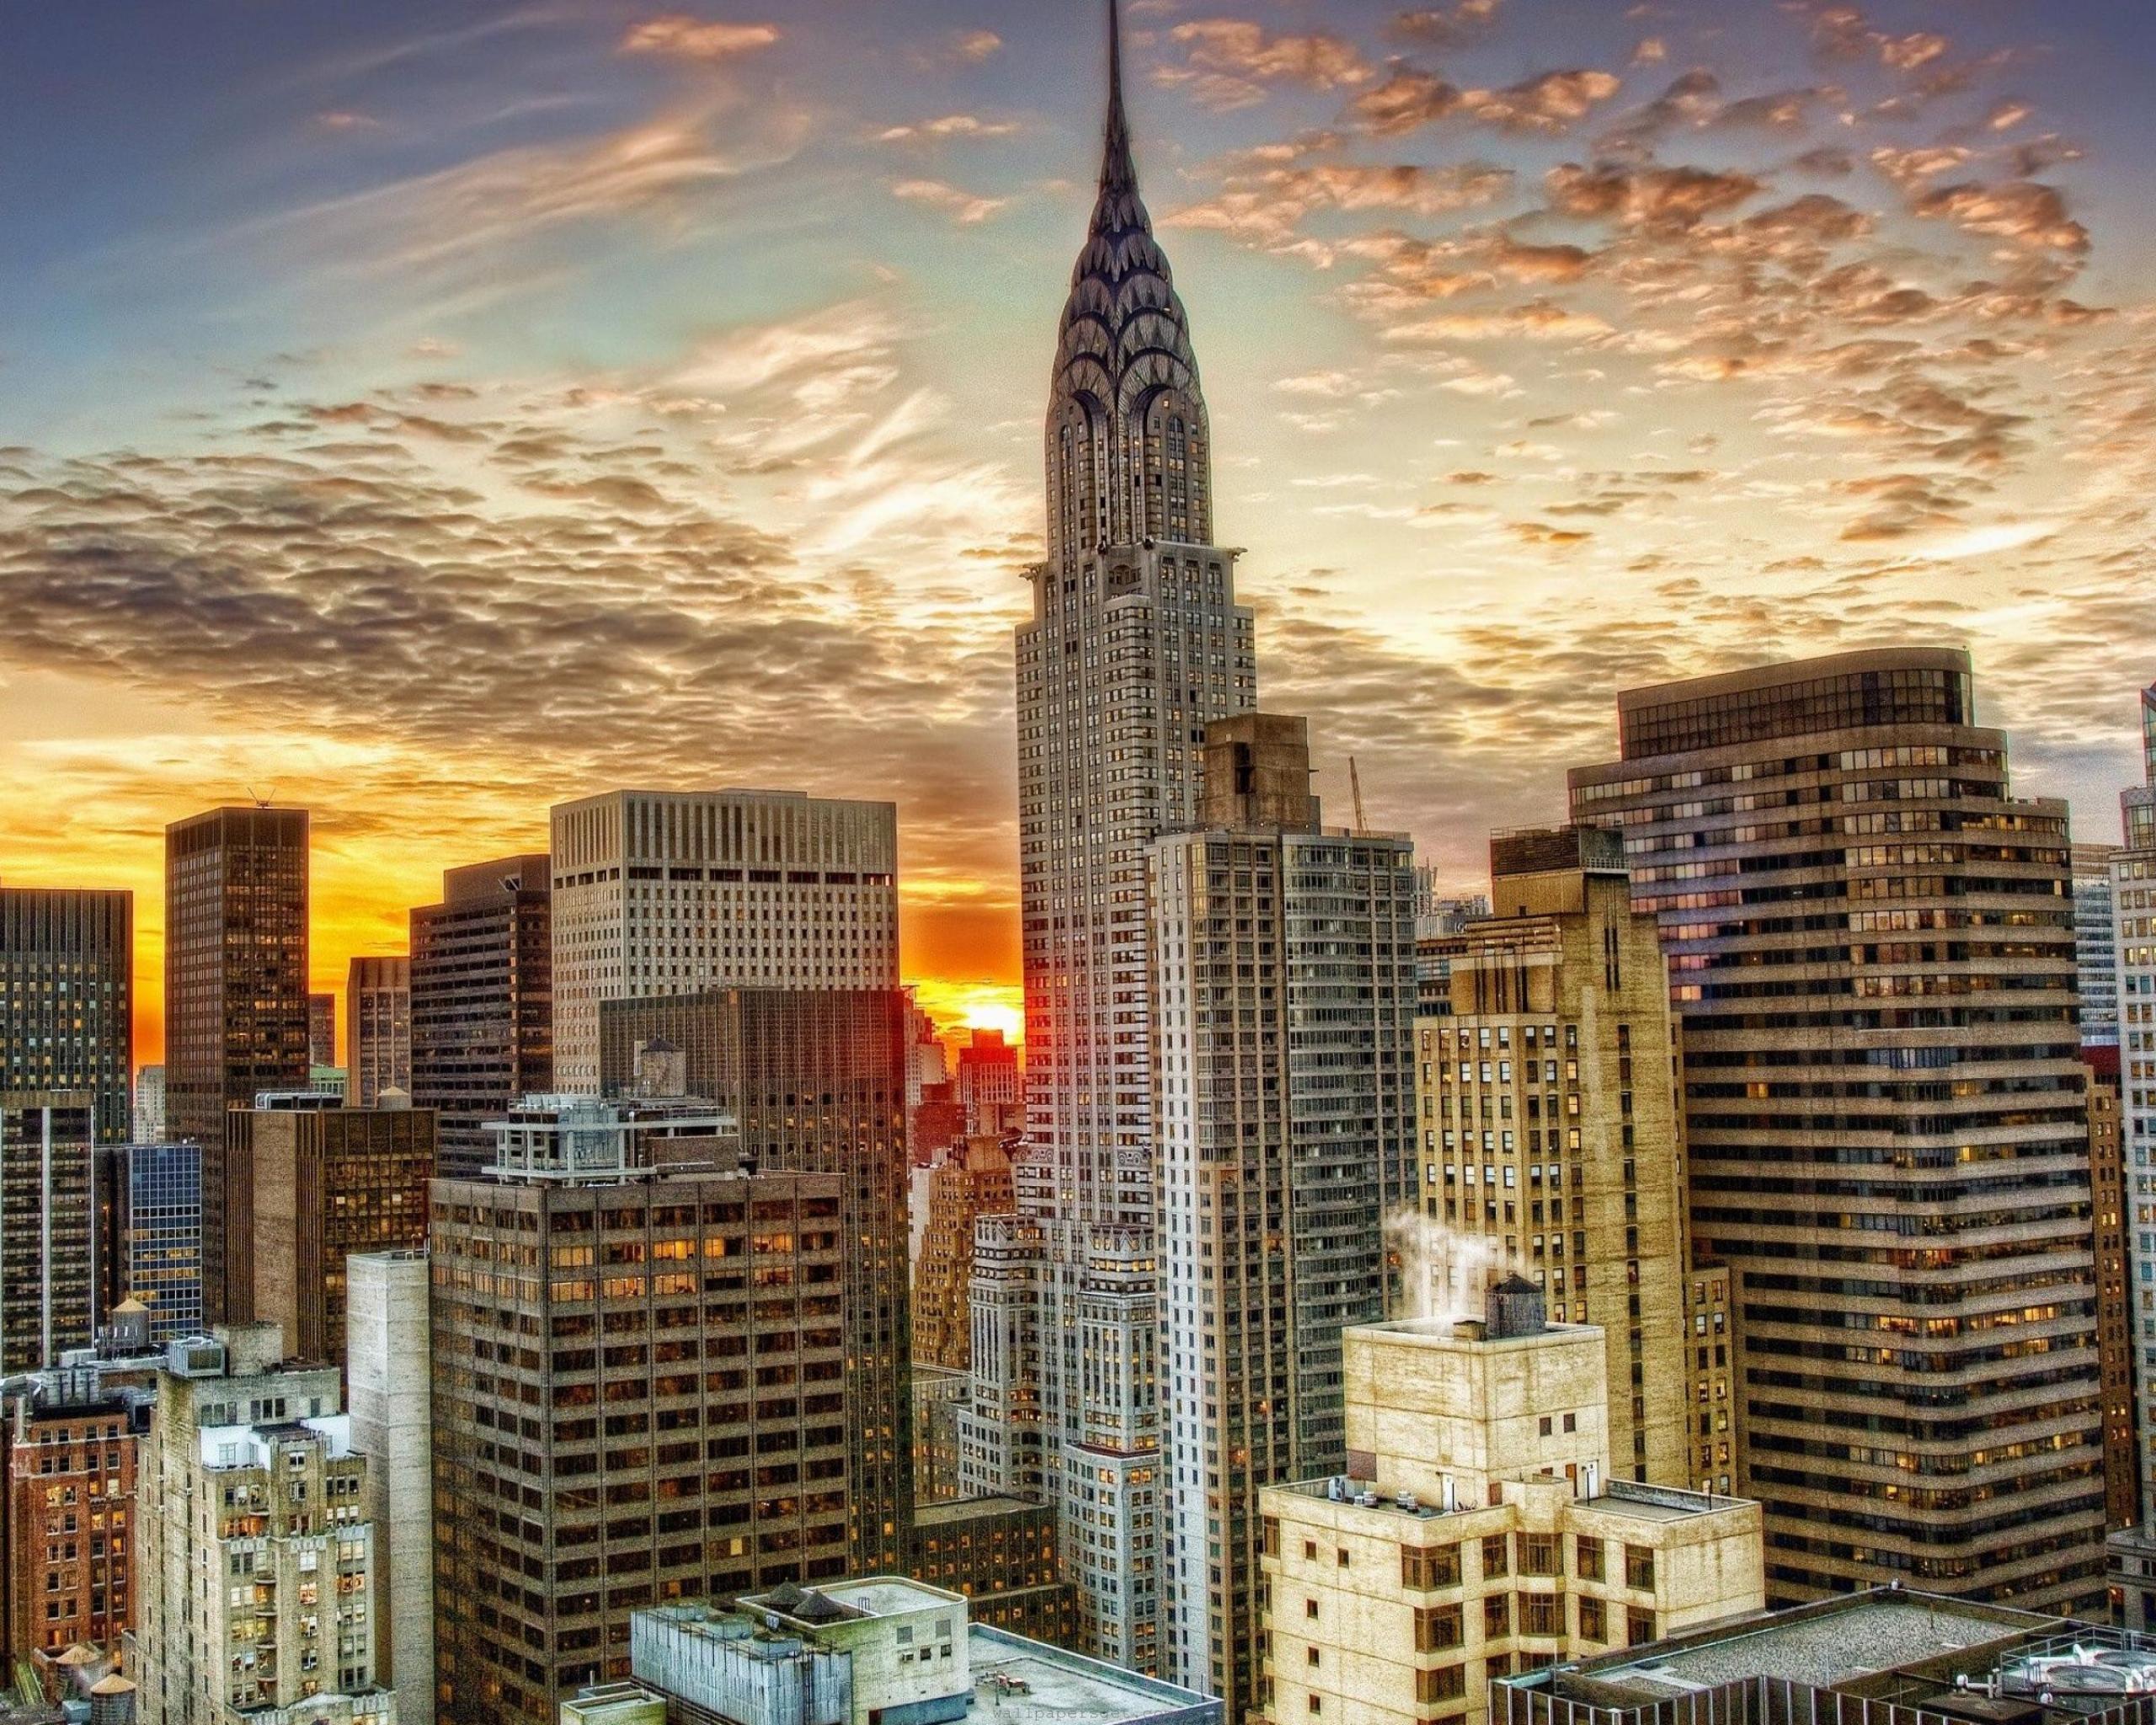 Free Download Cool Chrysler Building New Yorka Sunset Worlds Wallpapers 2560x2048 For Your Desktop Mobile Tablet Explore 42 Chrysler Building Wallpaper Chrysler 300 Wallpaper Chrysler 200 Wallpaper Mopar Wallpapers Hd